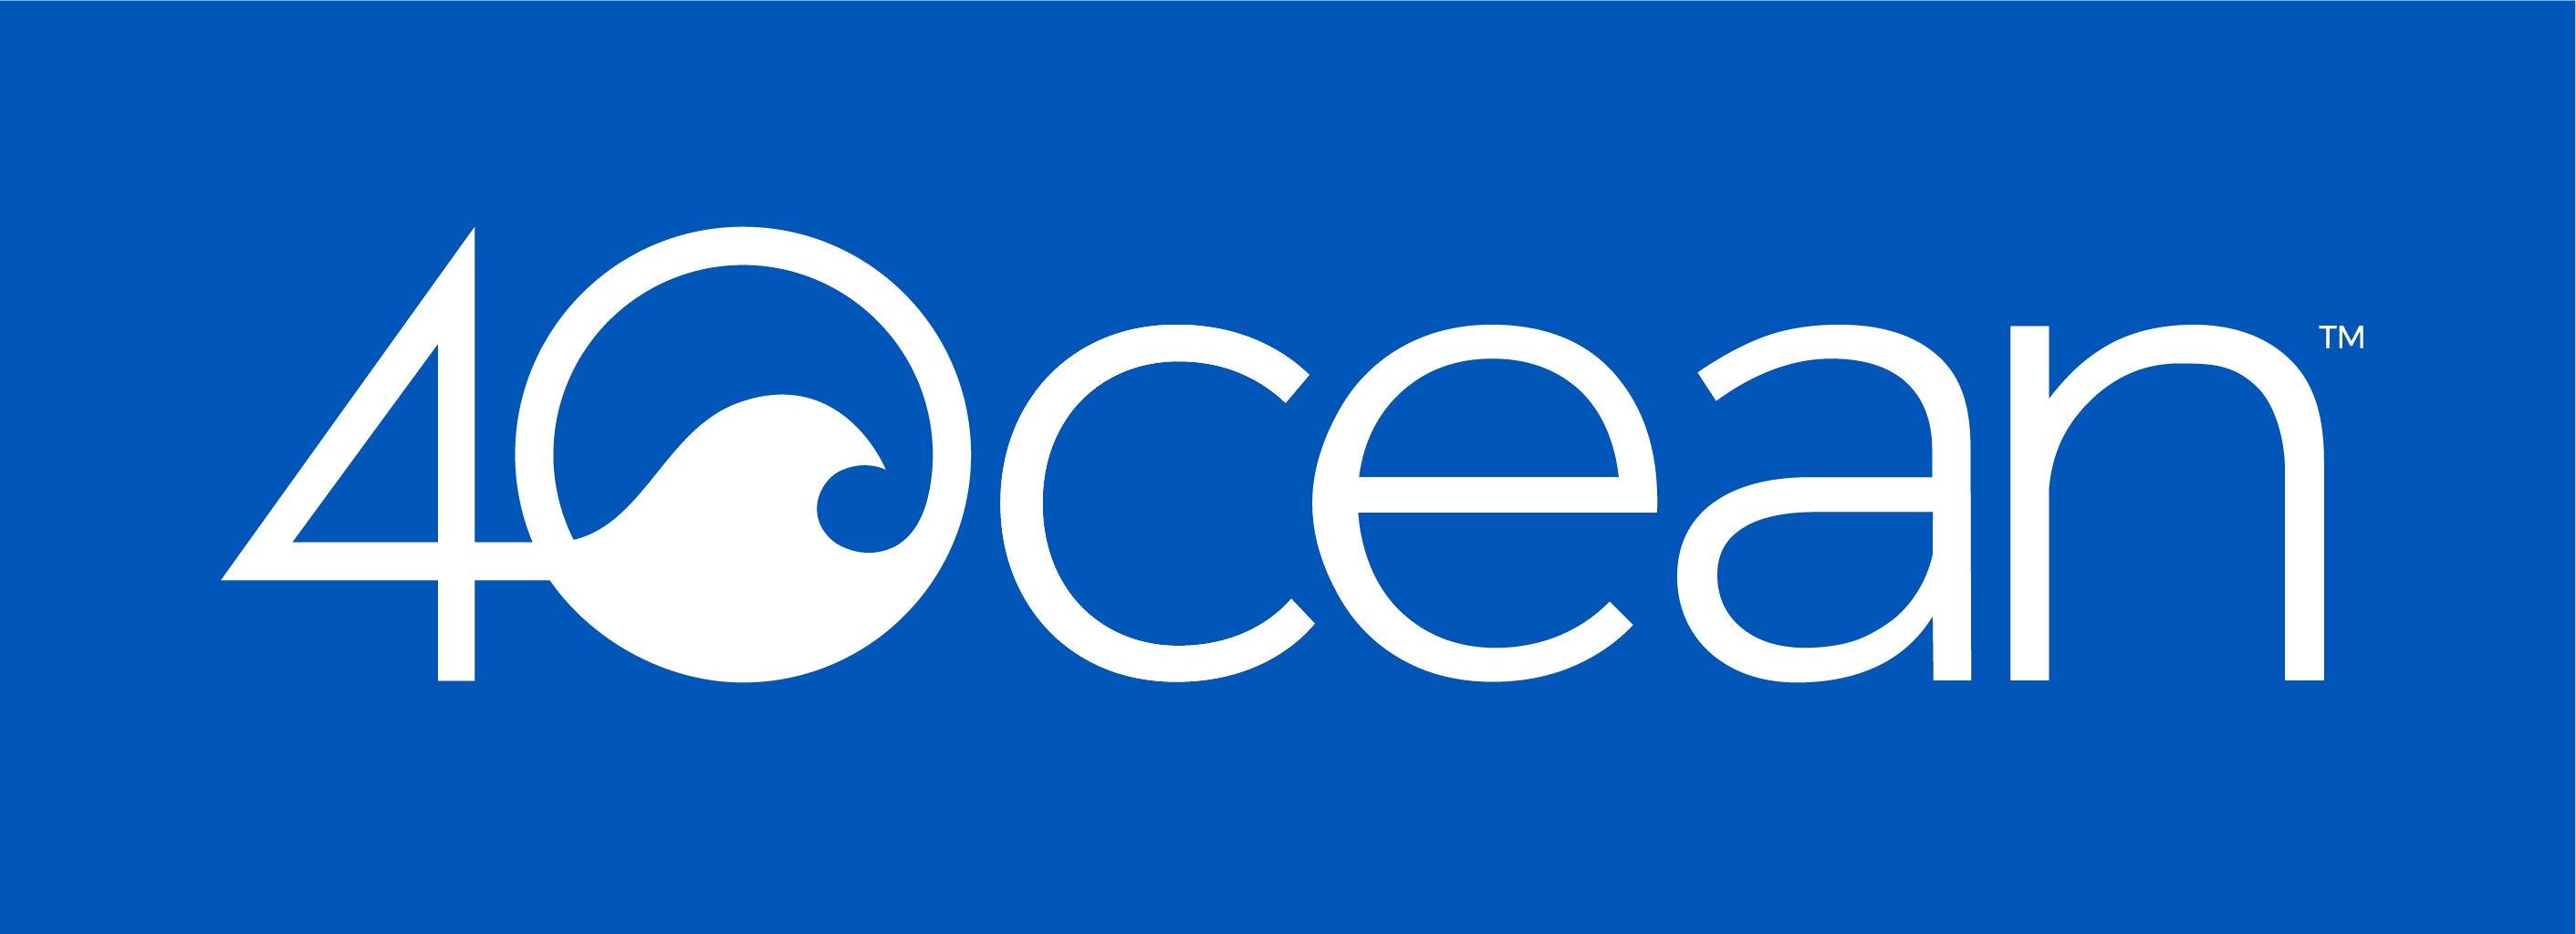 What a Year it has Been for 4ocean - Thank You - 4ocean